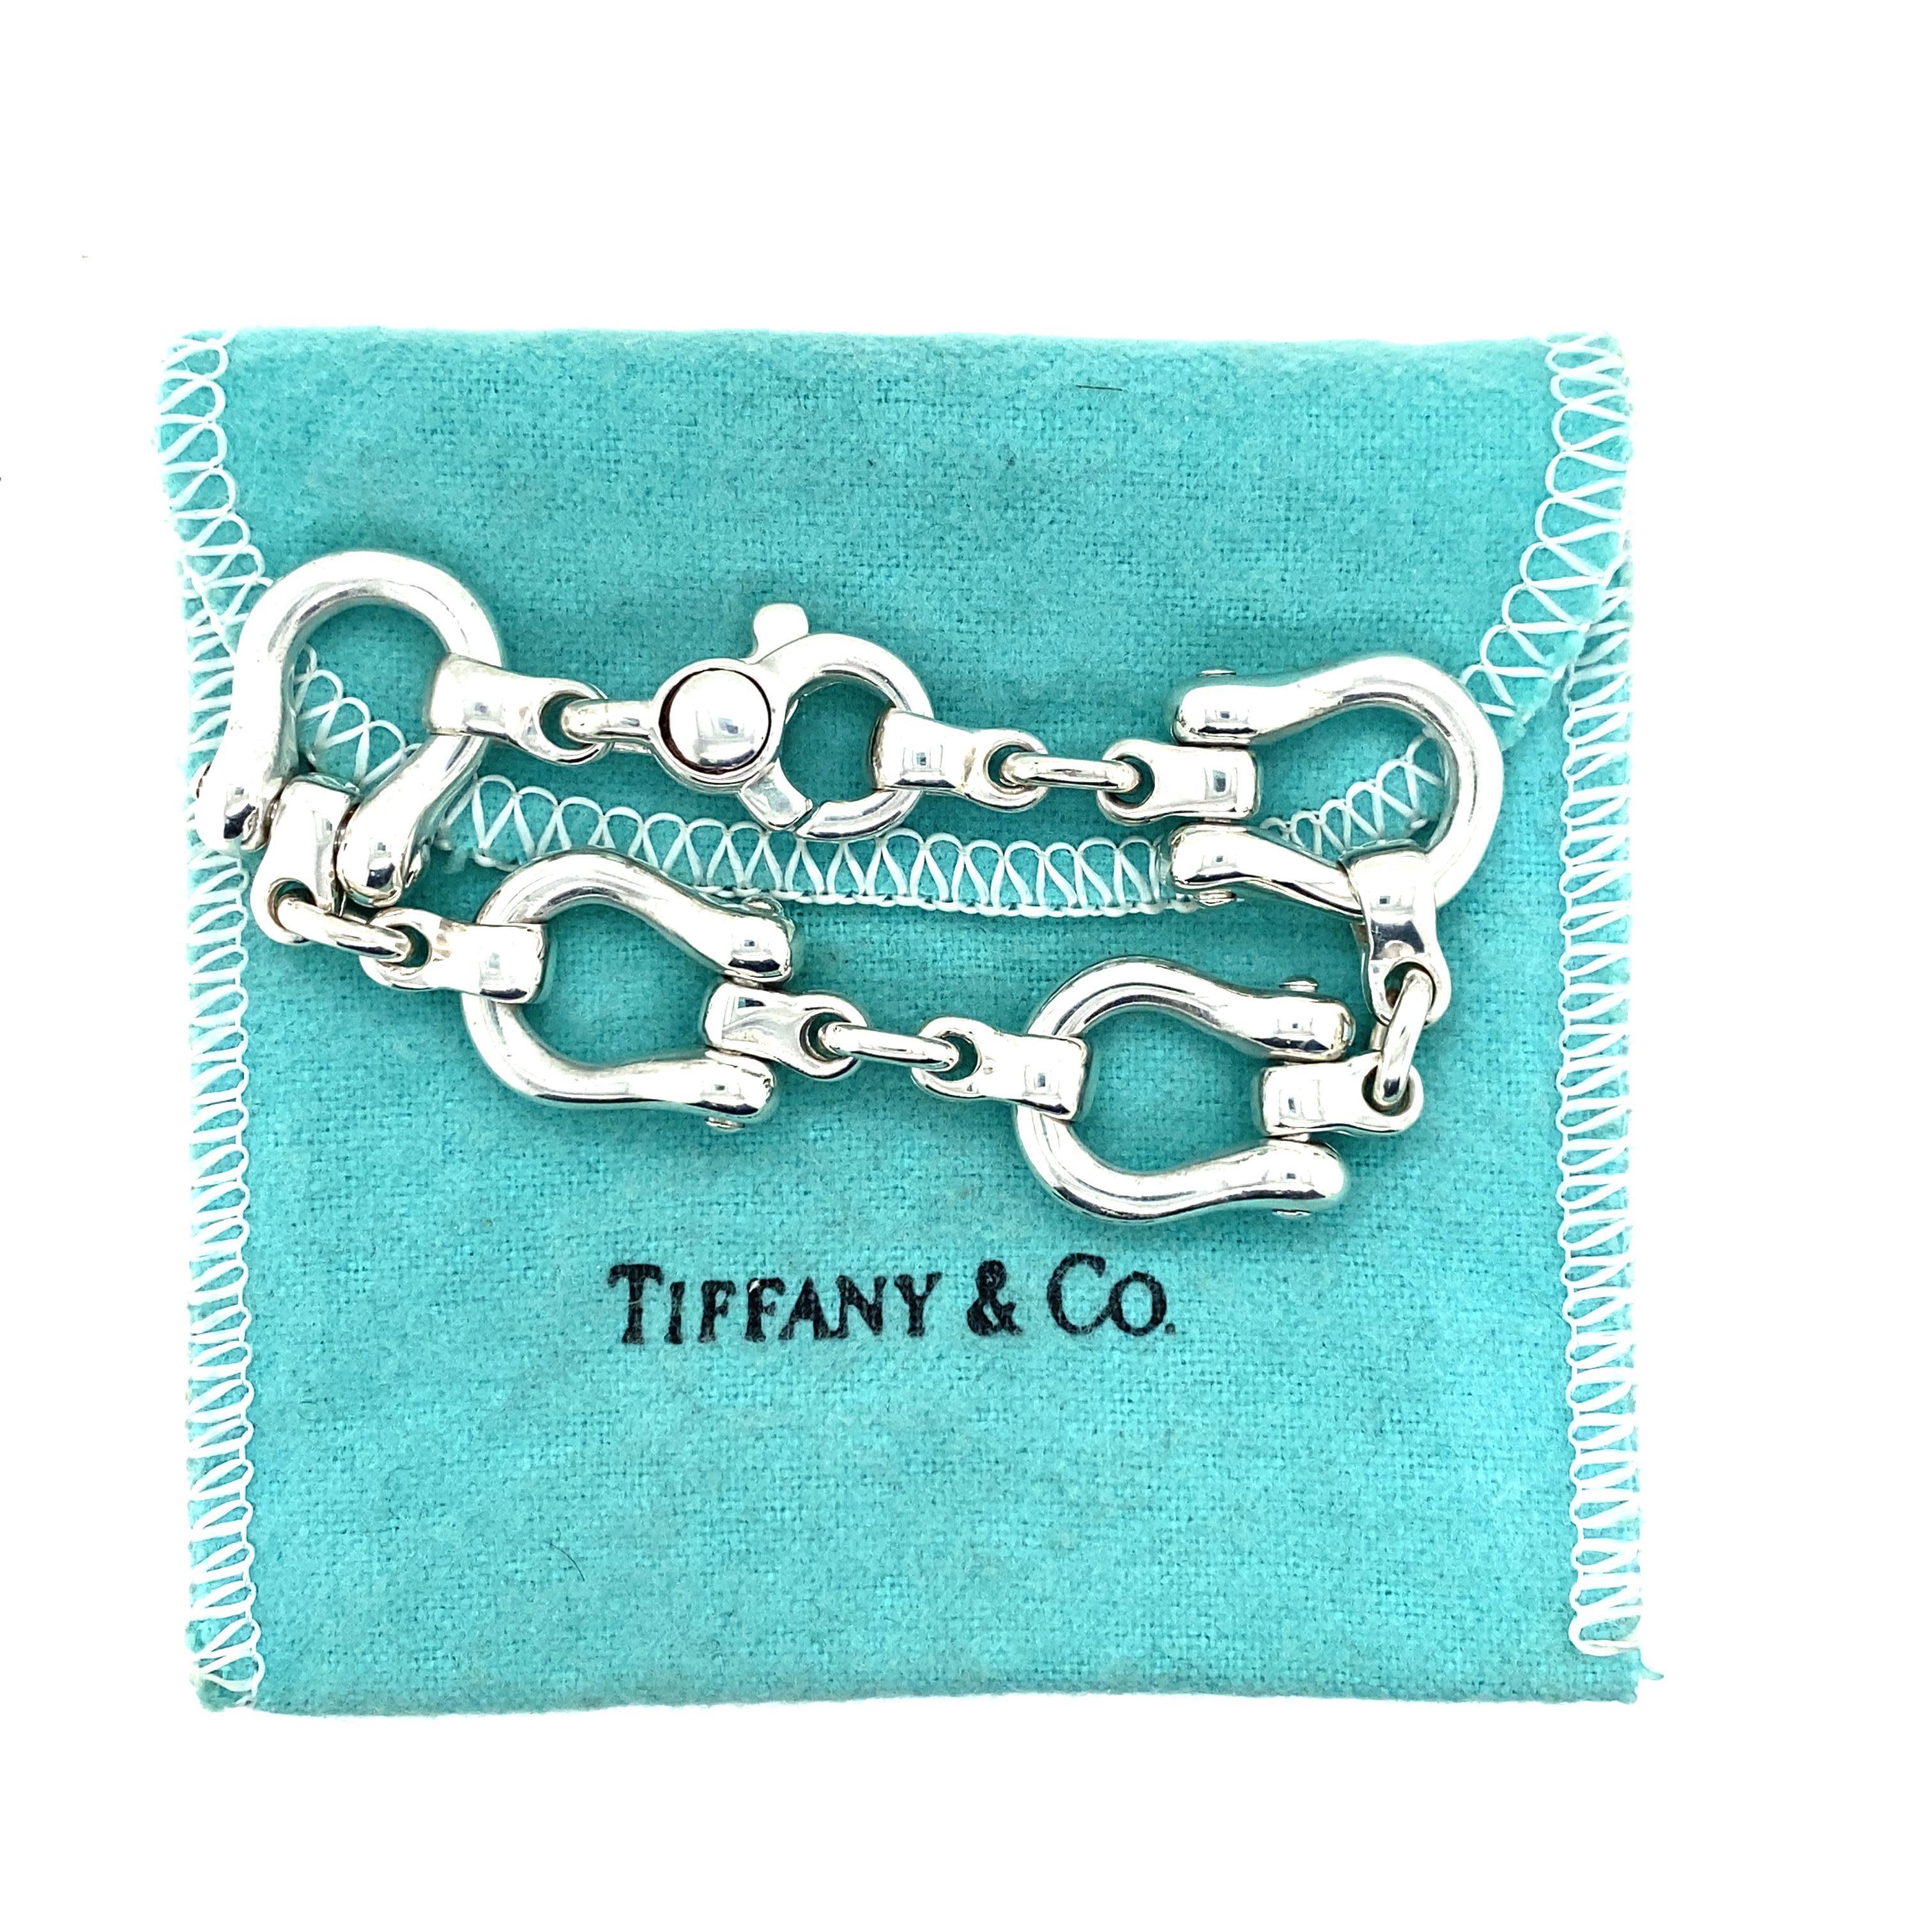 Tiffany & Co. Horseshoe Link Bracelet in Sterling Silver.  The Bracelet measures 6 1/2 inch in length and 5/8 inch in width at the widest point.  44.32 grams.  Signed.  Tiffany & Co. Blue bag included.